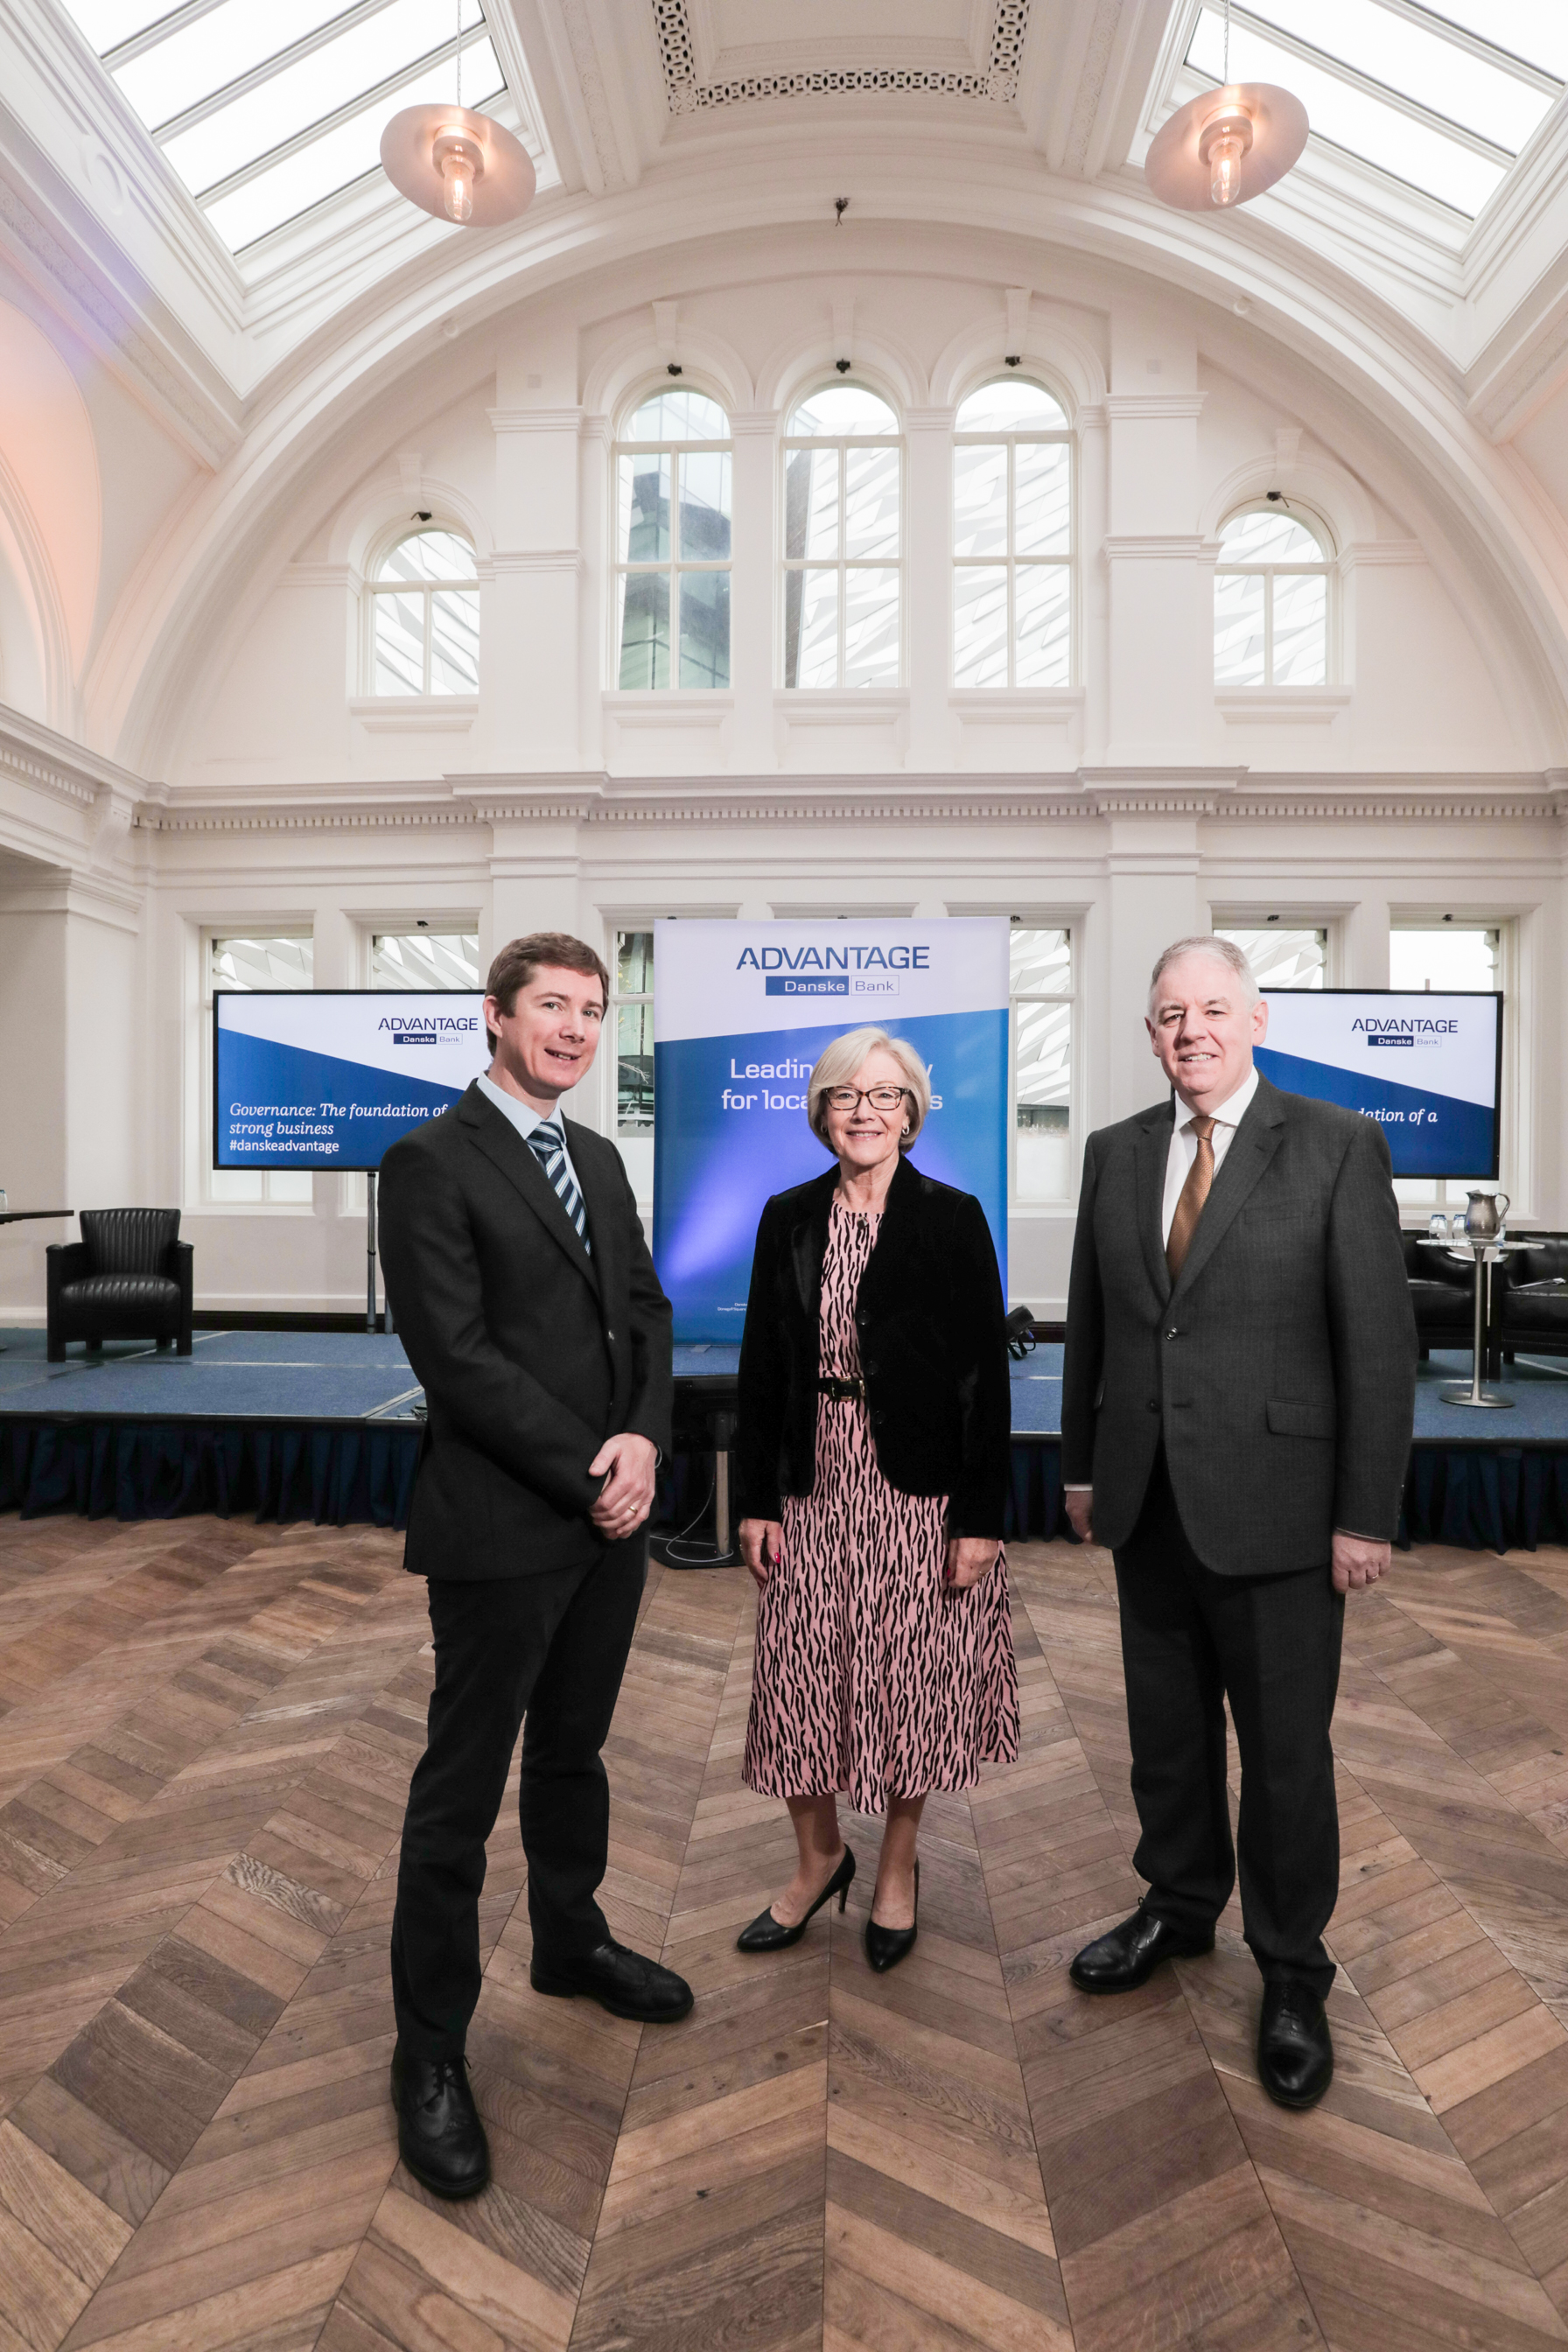 Three people stand in a big bright room, all dressed very smartly. Behind them, on screens and a pop up, is the navy and white Danske Advantage branding.